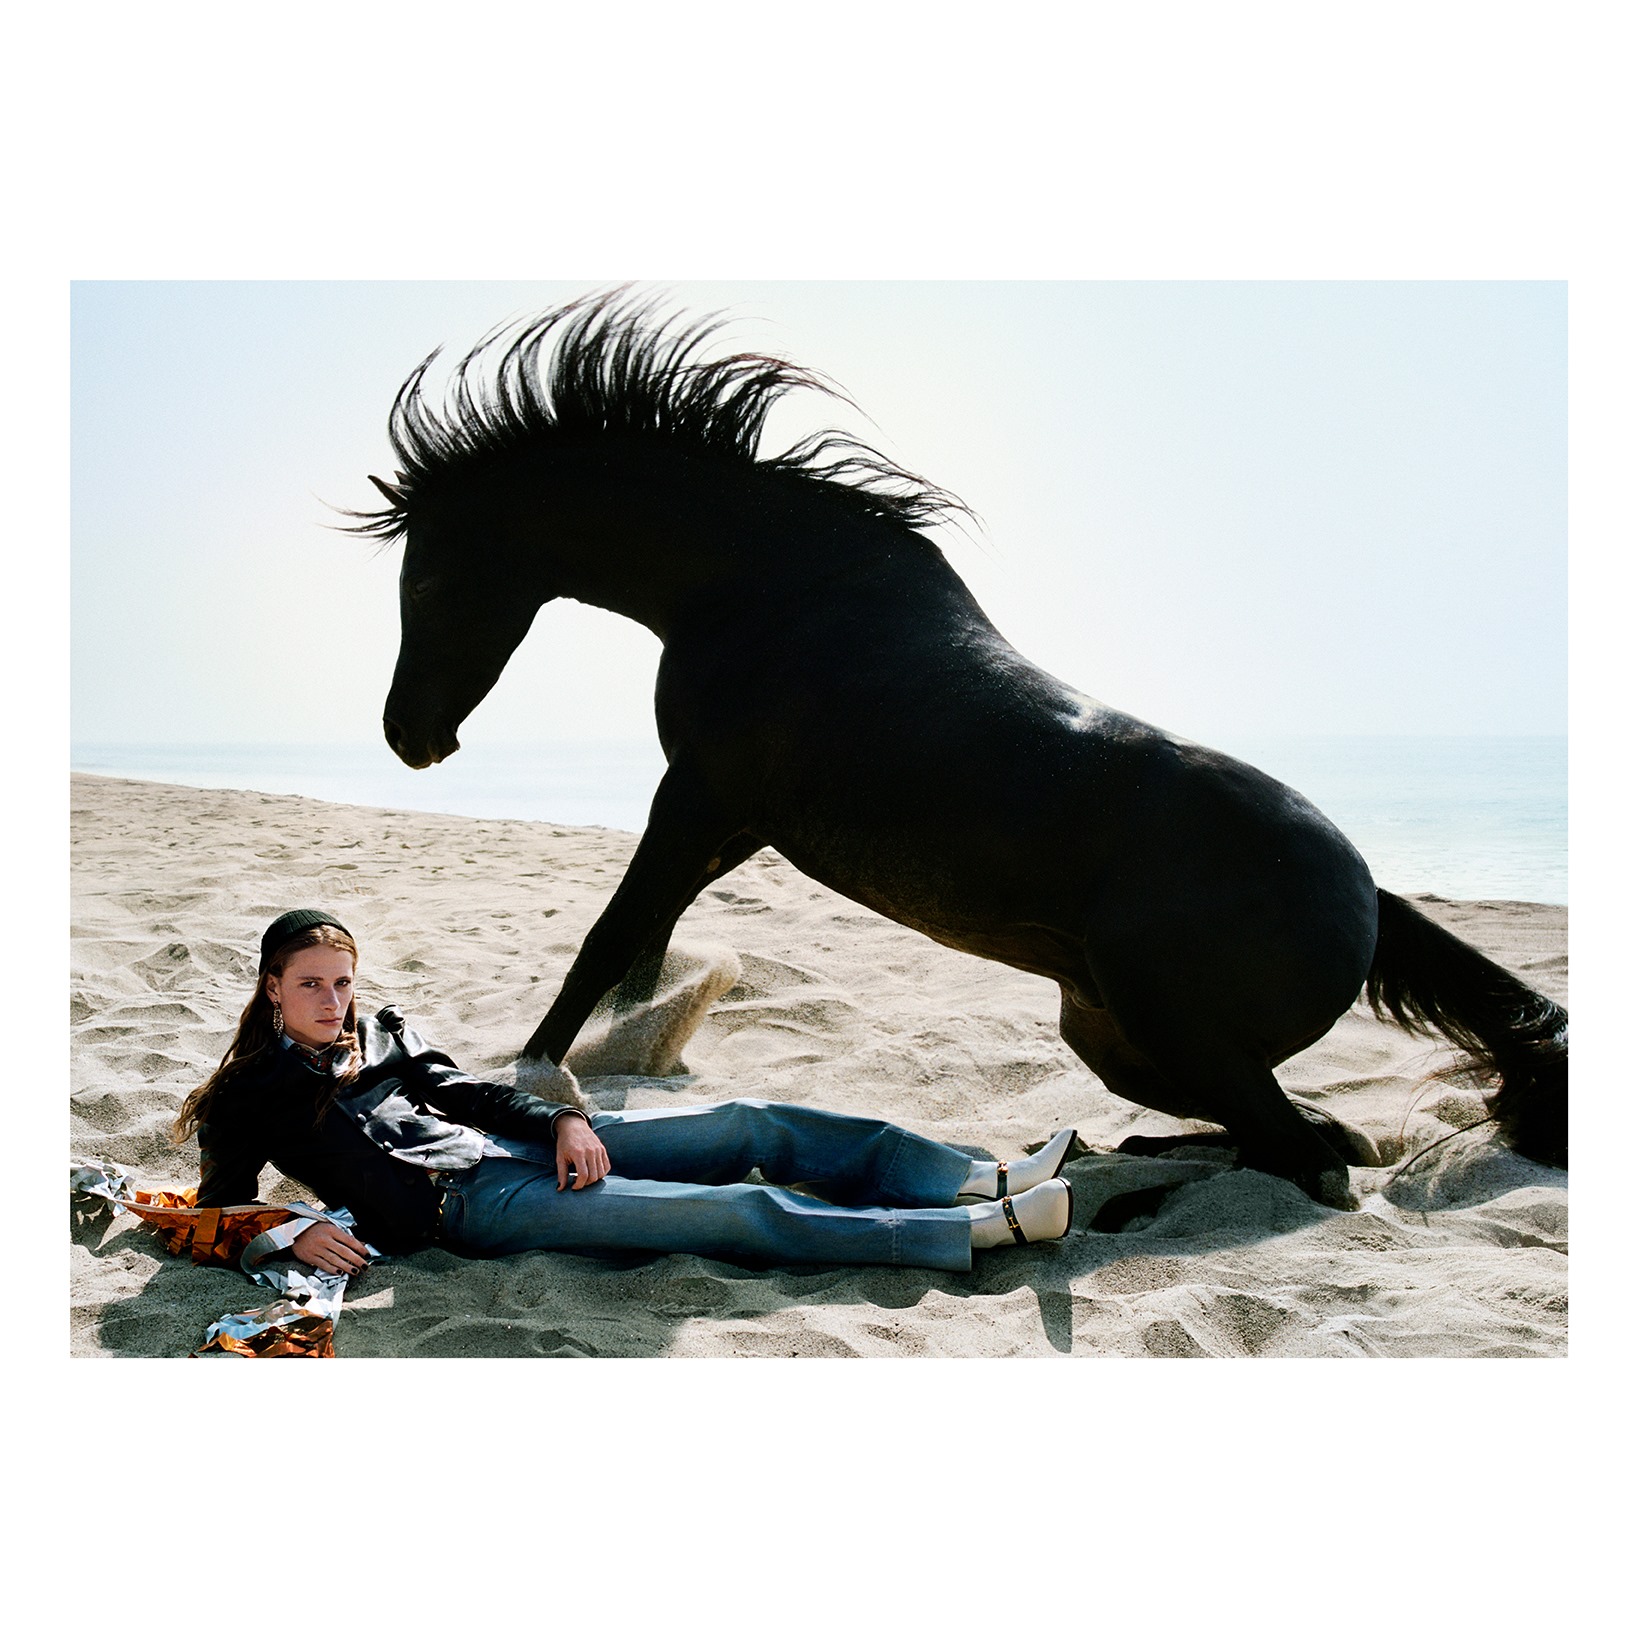 The notion of freedom of expression of the Gucci Spring Summer 2020 collection runs through the new campaign Of Course A Horse captured by Yorgos Lanthimos with creative direction by Alessandro Michele and art direction by Christopher Simmonds. Discover more on.gucci.com/2020_. 